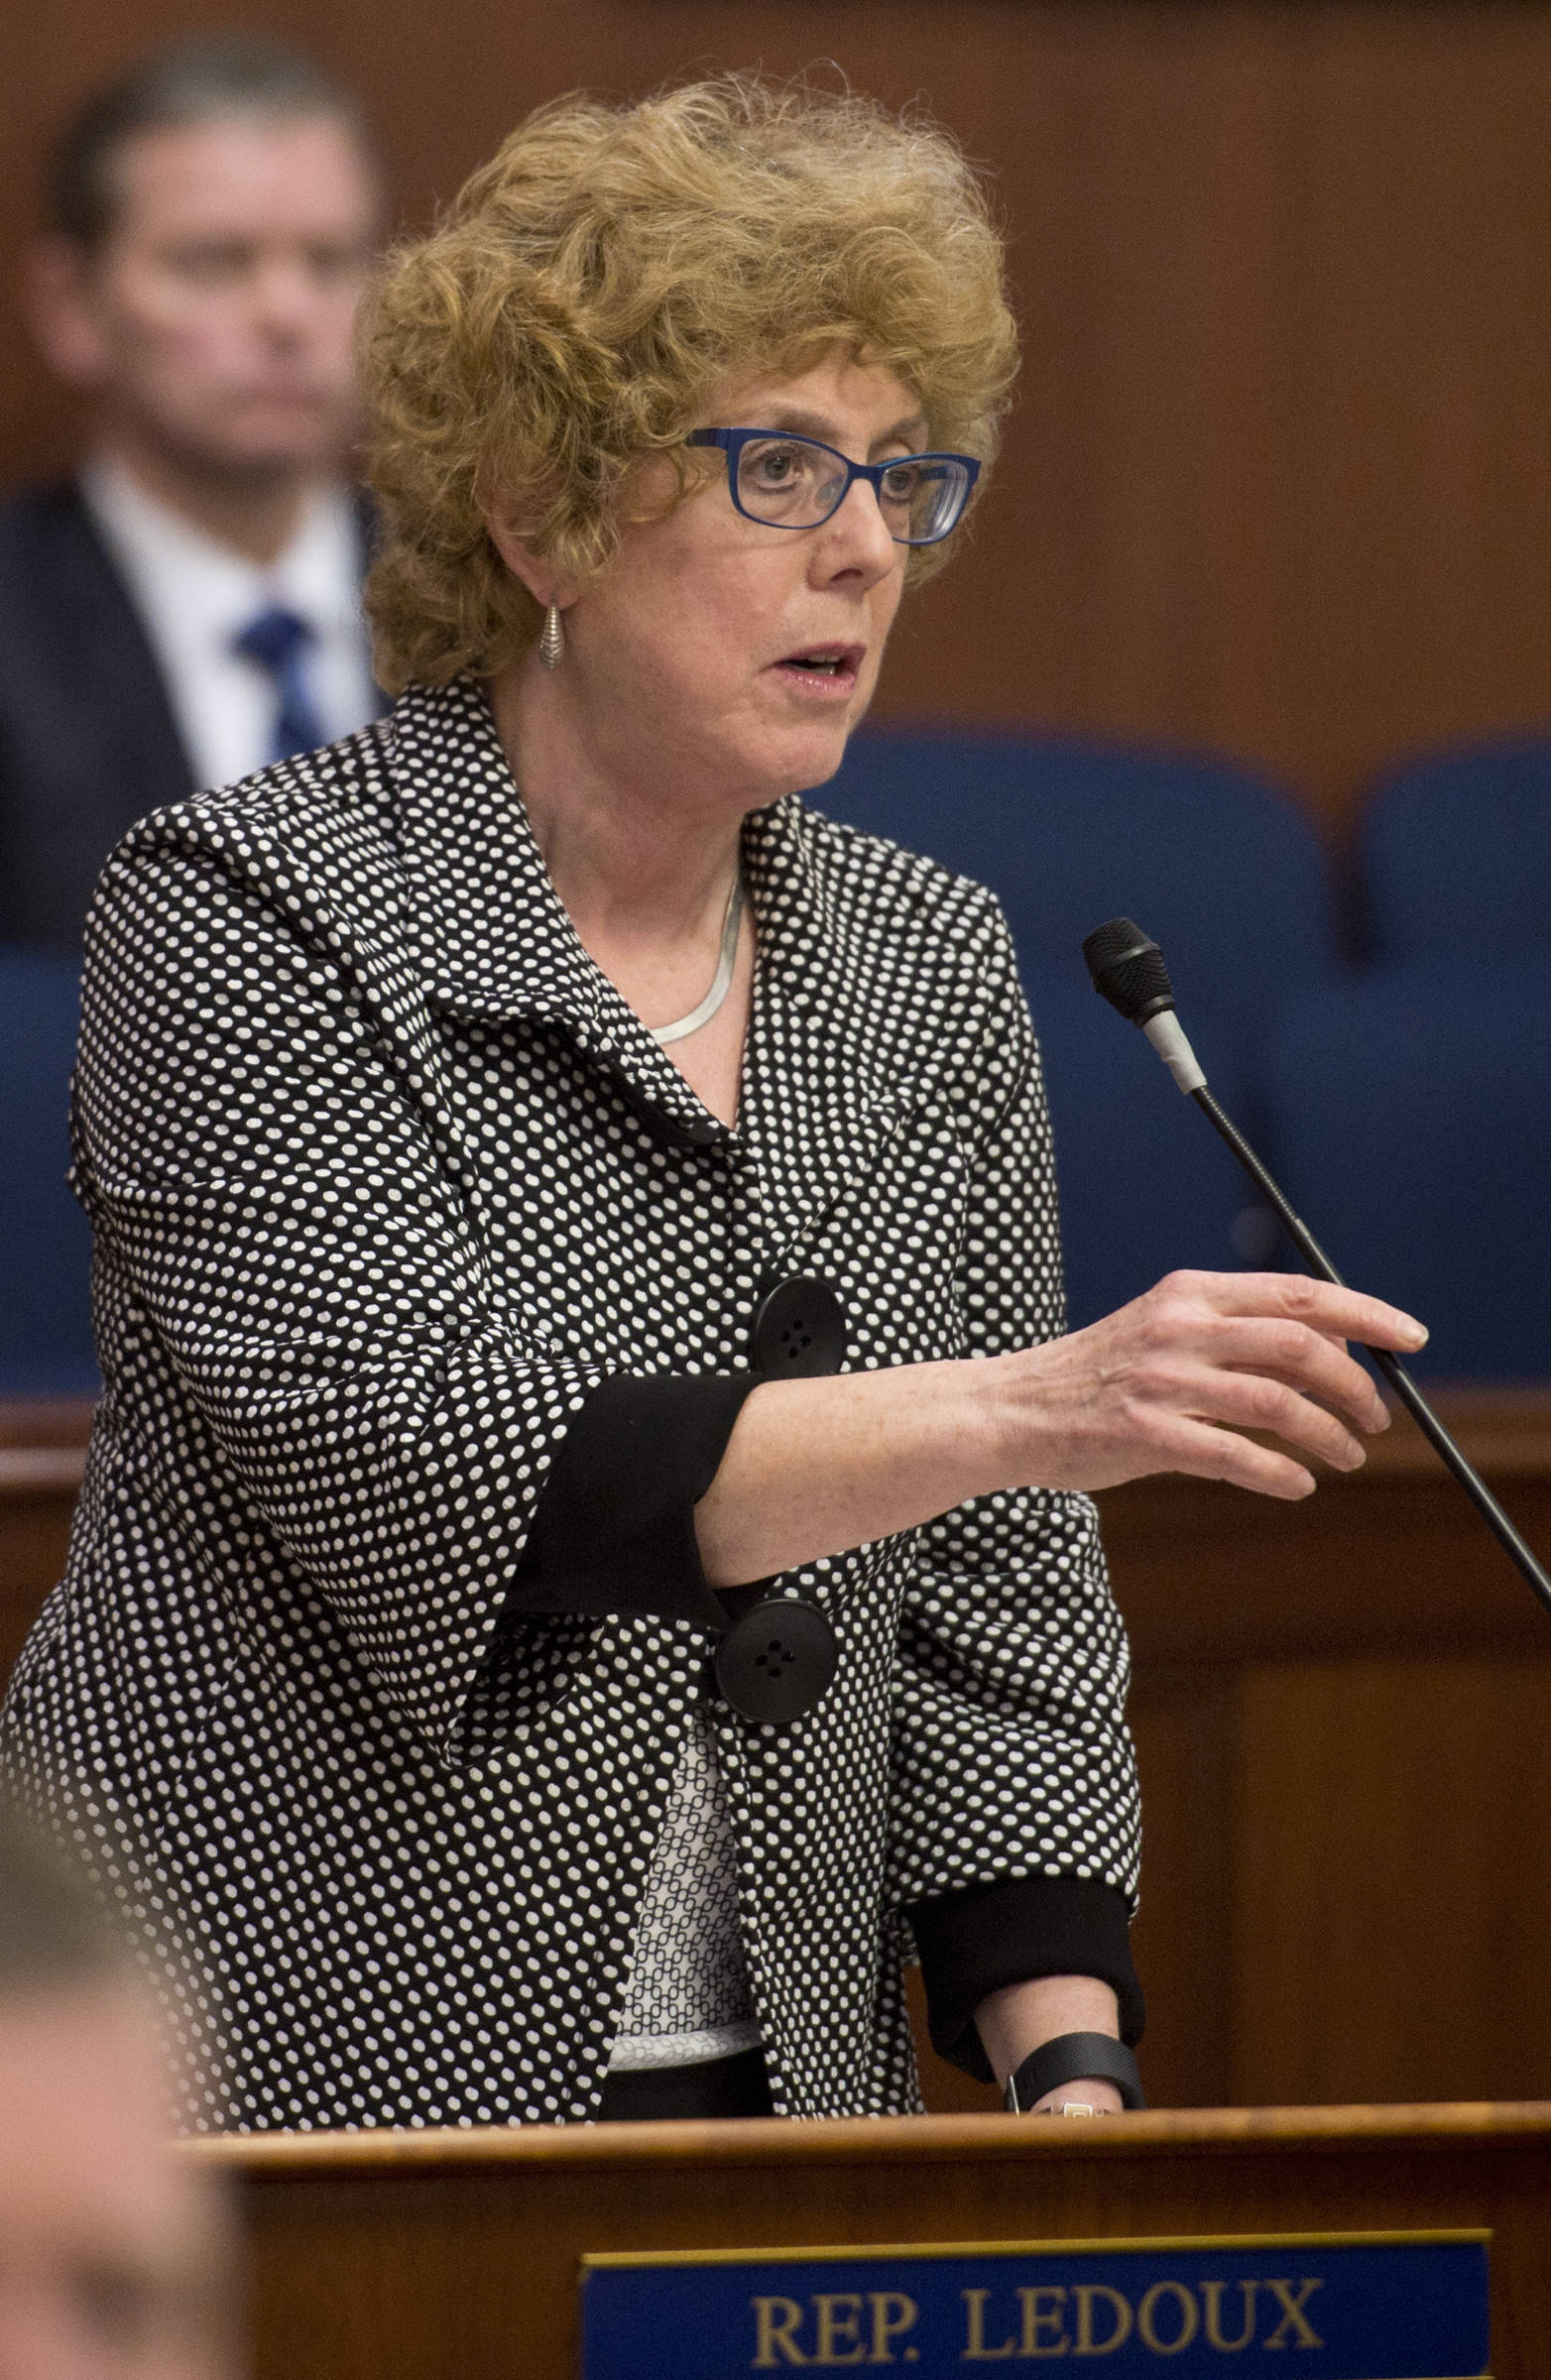 Rep. Gabrielle LeDoux, R-Anchorage, speaks in the House chambers on Wednesday, April 5, 2017. Rep. LeDoux is sponsoring HB 200 that would establish a top two nonpartisan open primary election system for elective state executive and state and national legislative offices. (Michael Penn | Juneau Empire)